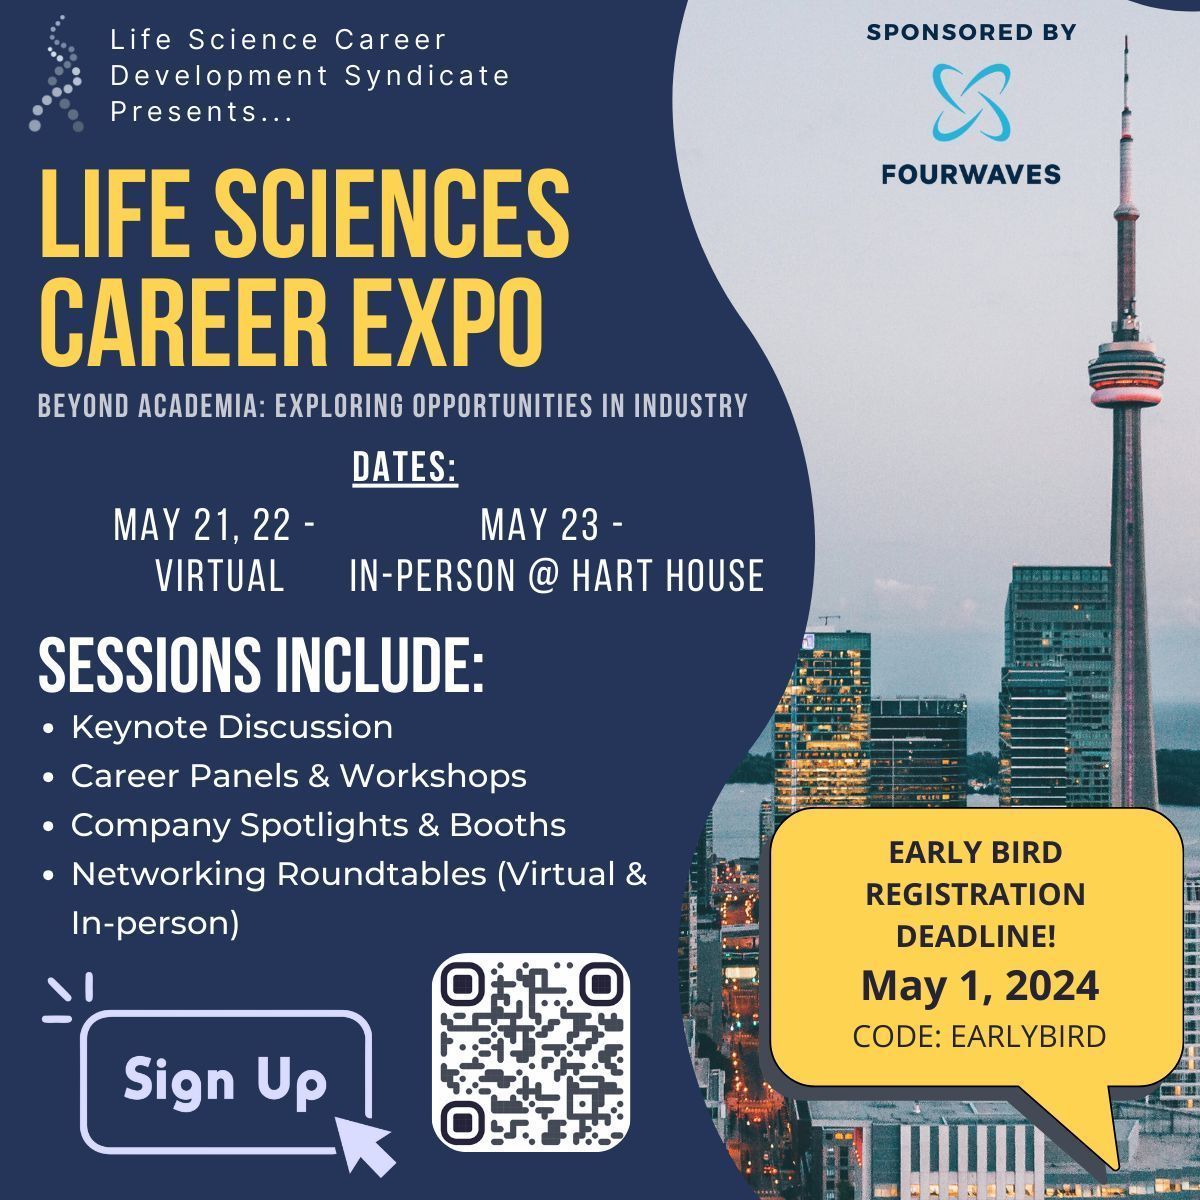 LSCDS is excited for another installment of the Life Sciences Career Expo (LSCE), taking place from May 21-23, 2024. Scan the QR code ⇩ or visit our website to register. Enter the code EARLYBIRD to receive a 50% discount! Website: buff.ly/43FBFox